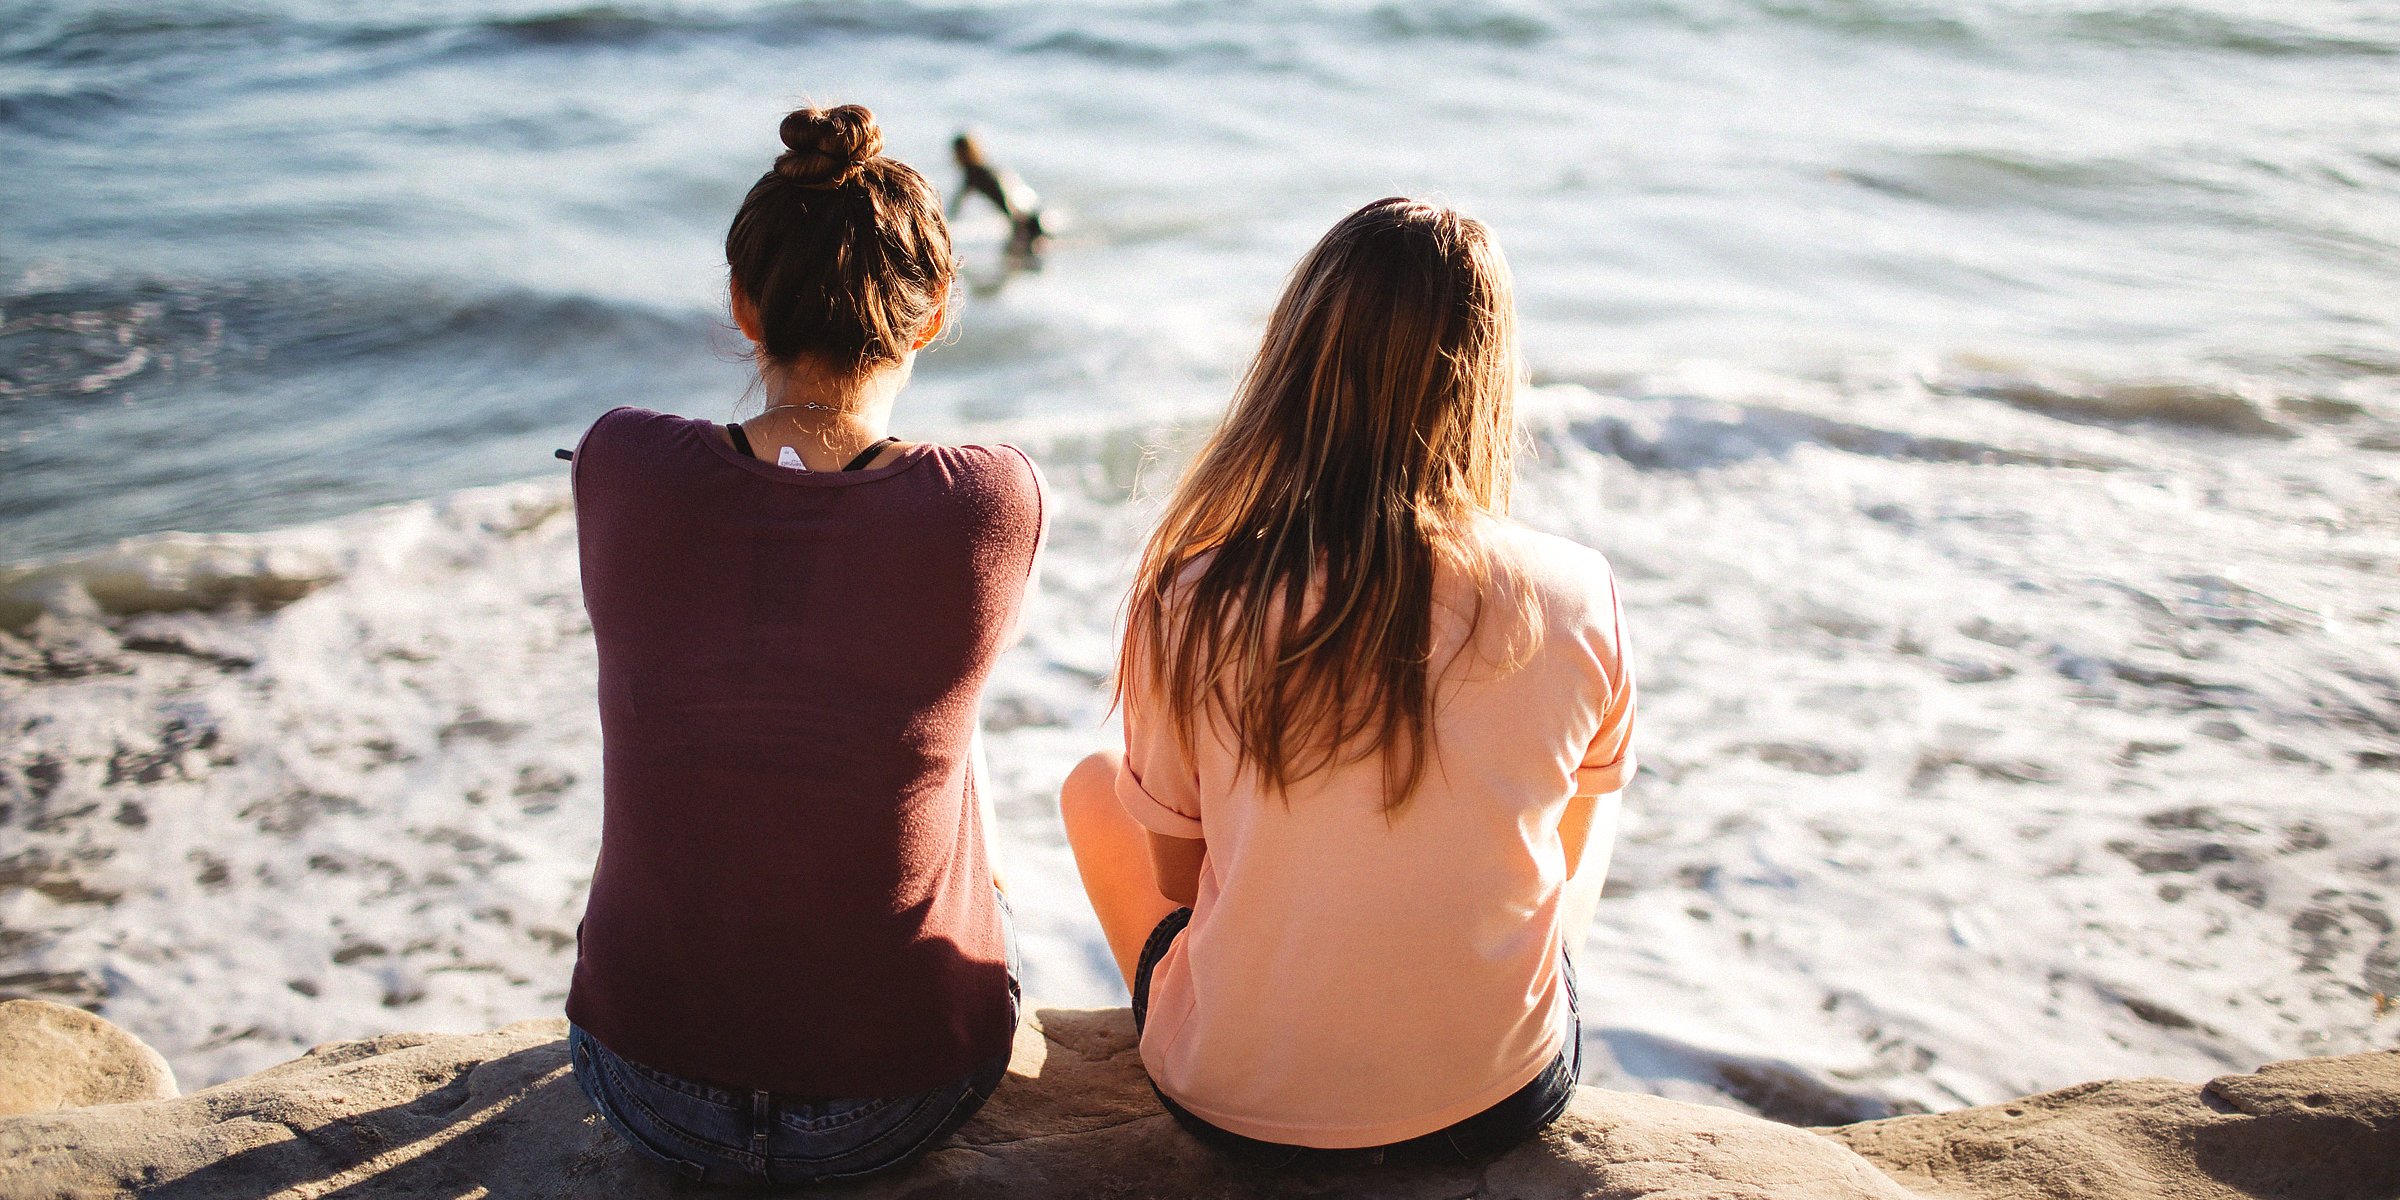 Two girls sitting in front of a sea | Source: Unsplash.com